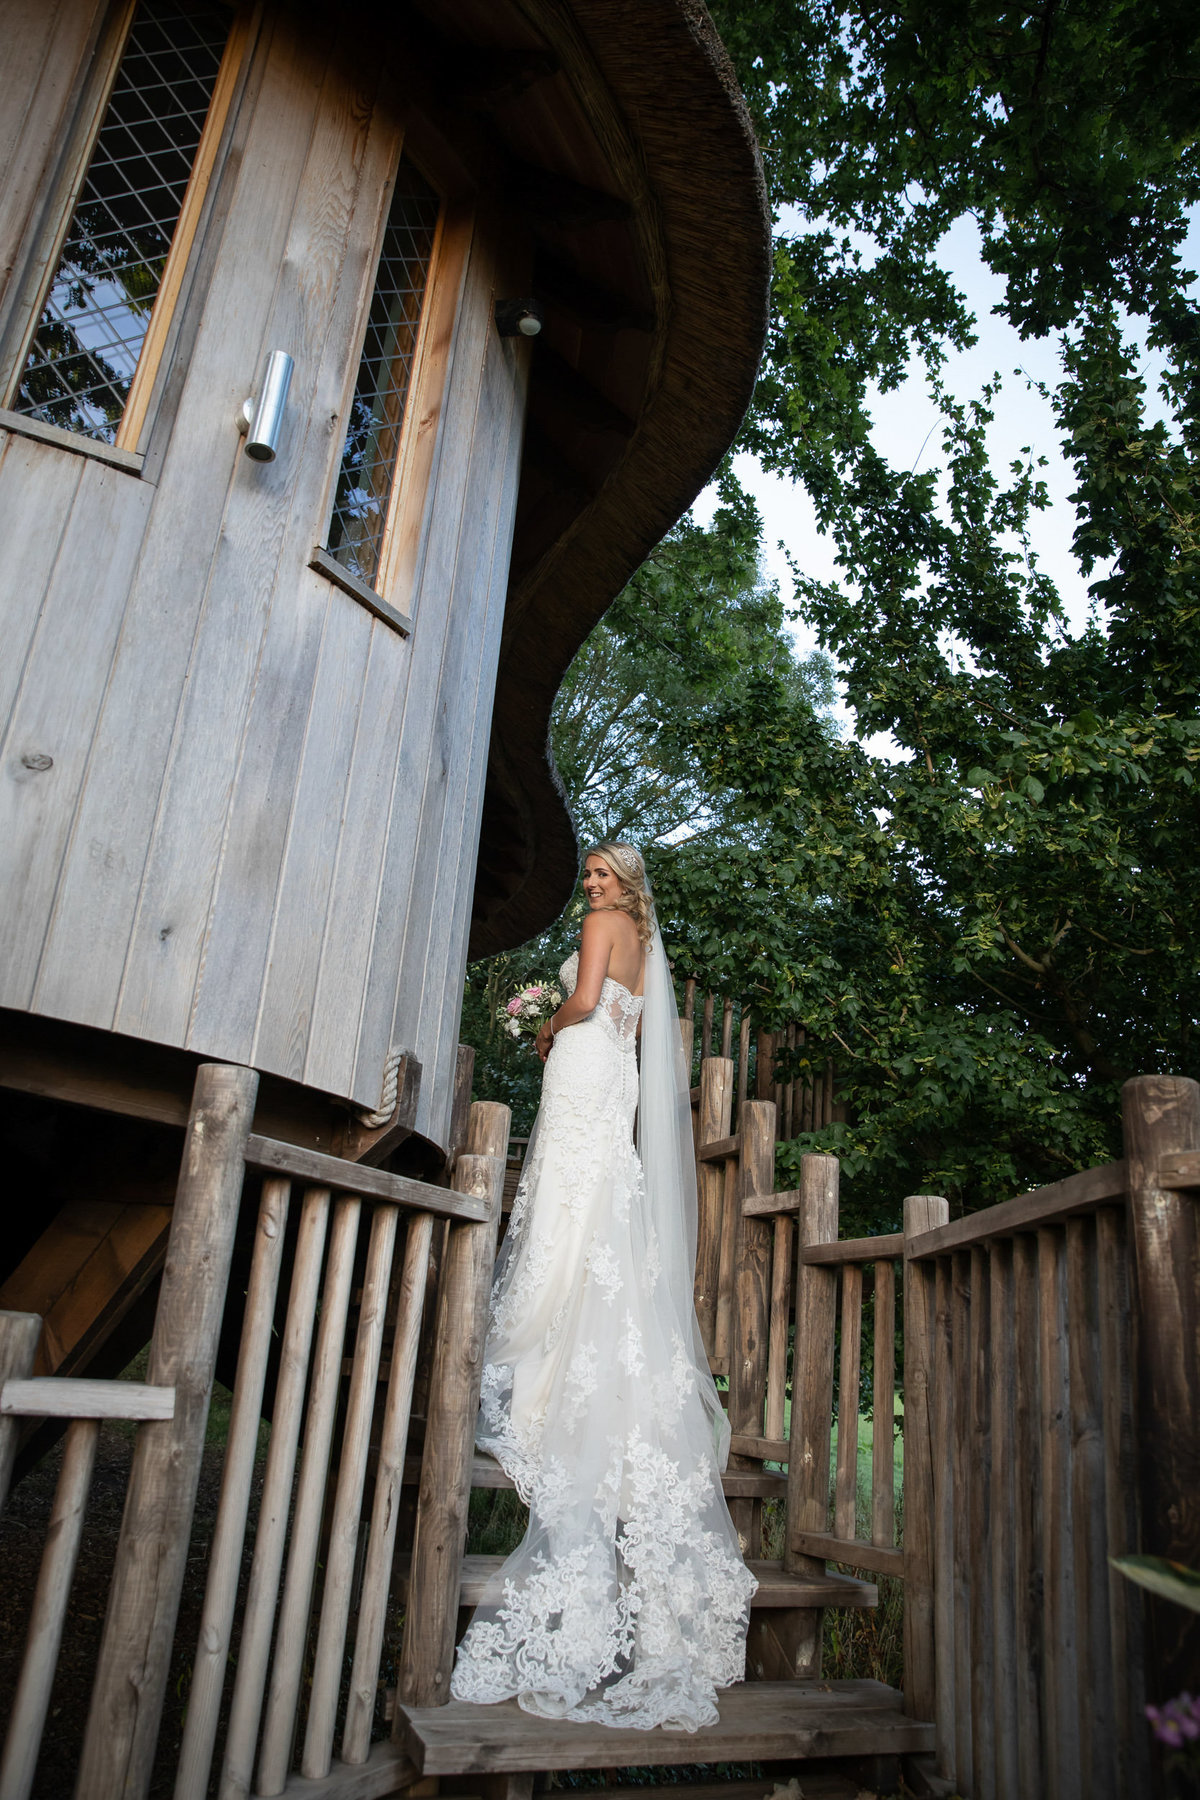 Bride at Treehouse at Deer Park Country House Hotel Wedding in Devon_